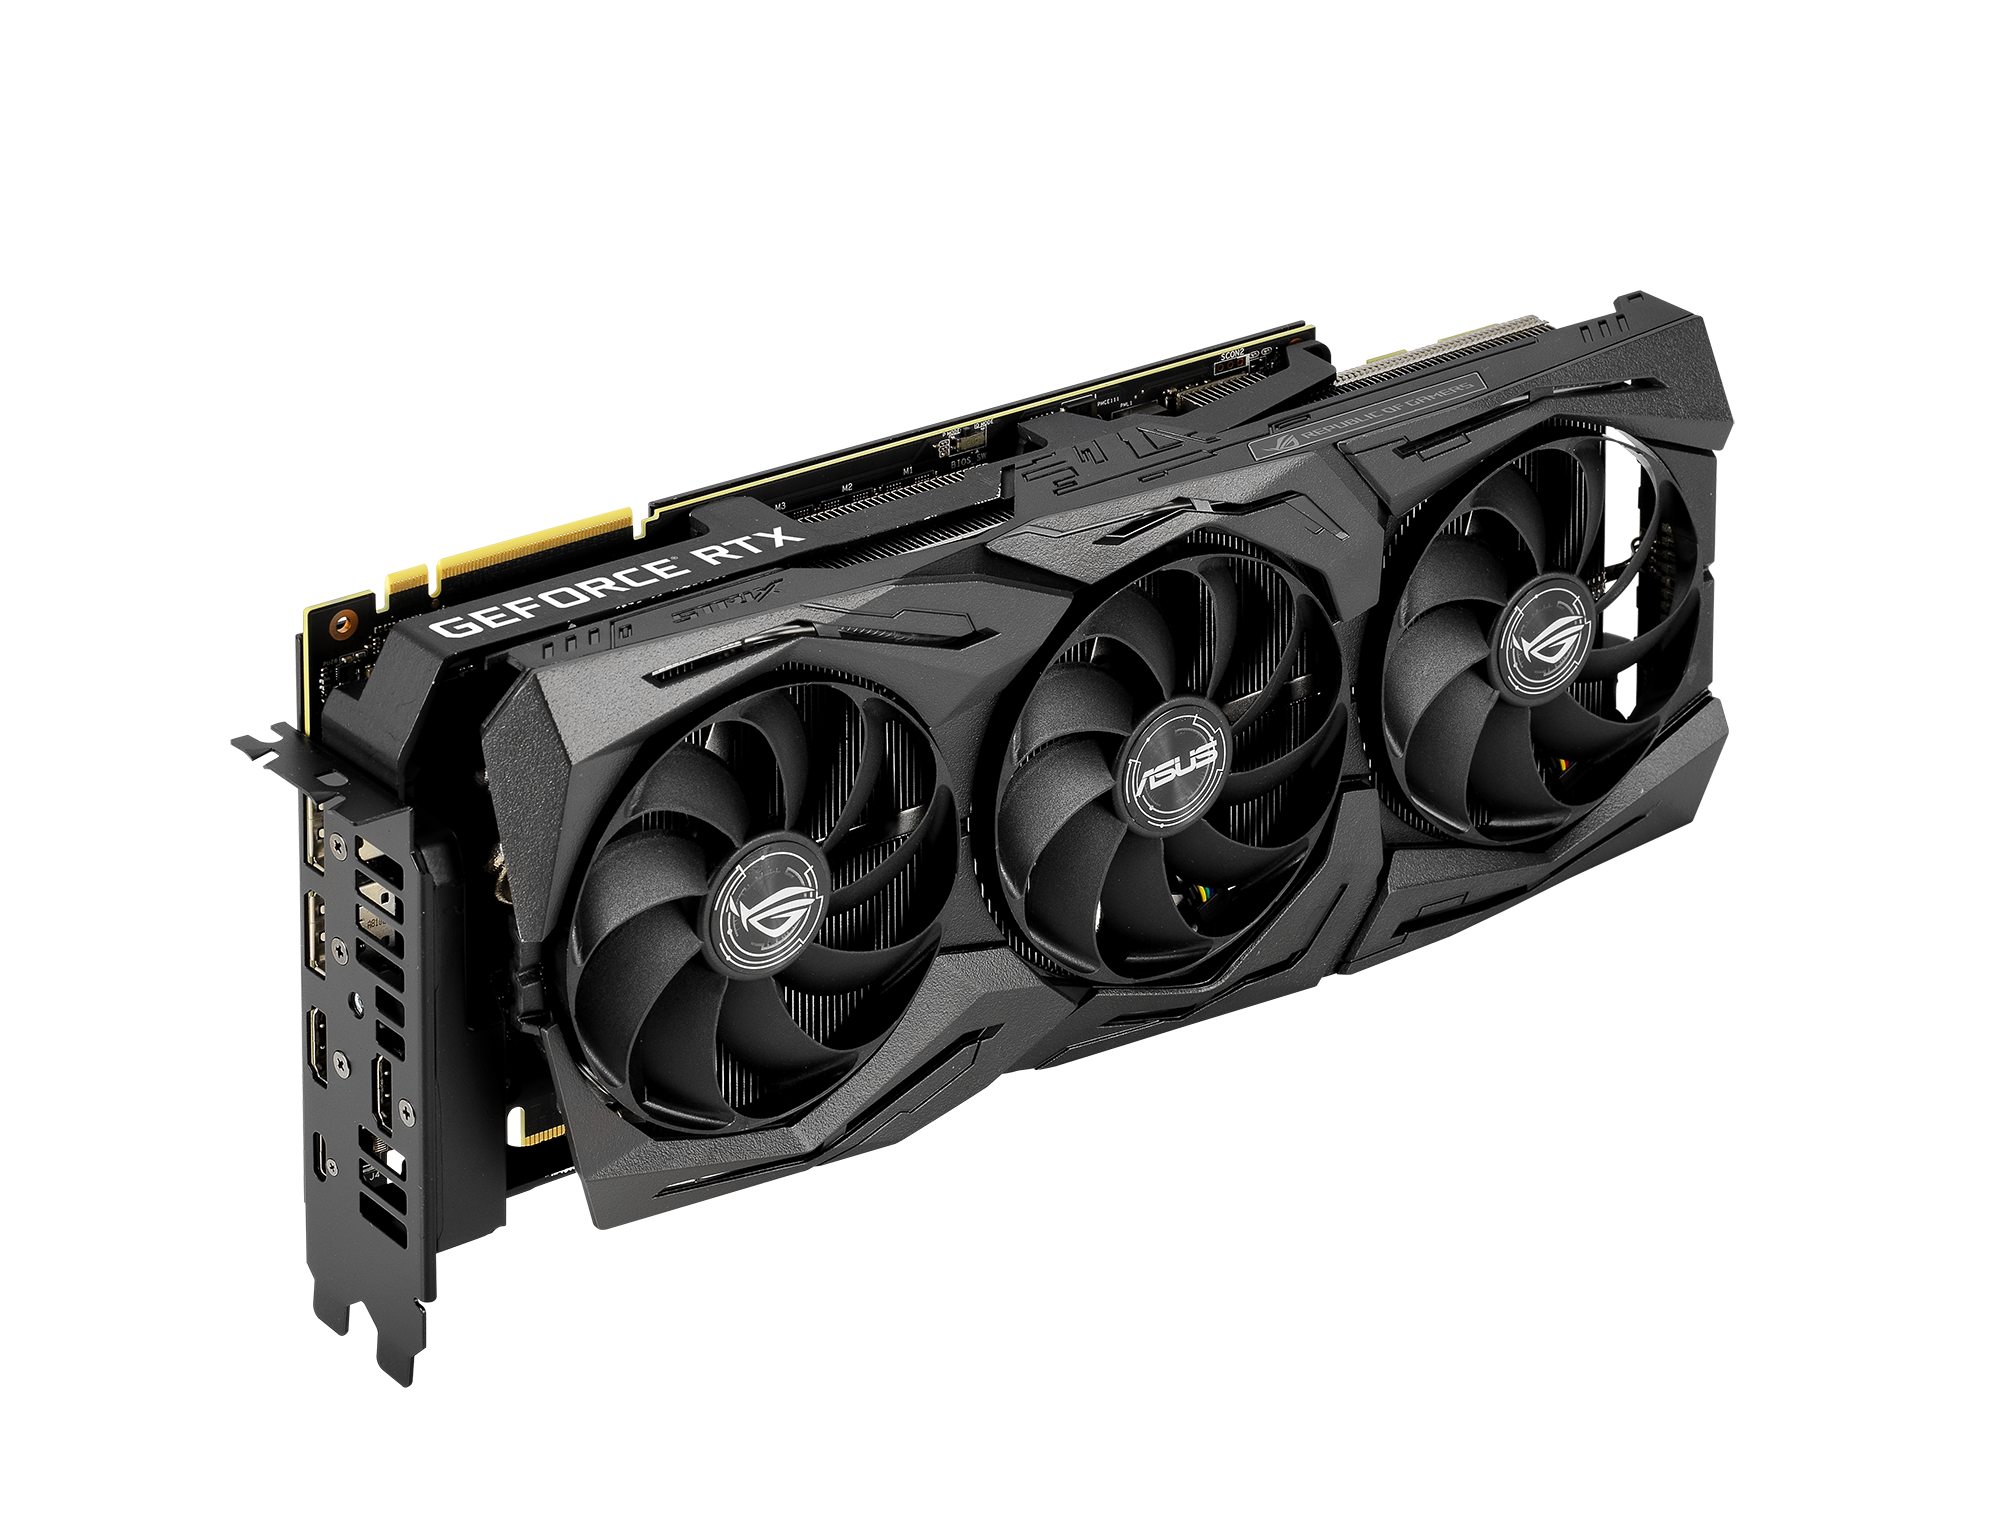 NVIDIA Founders GeForce RTX 2080 Ti Graphics Card - US